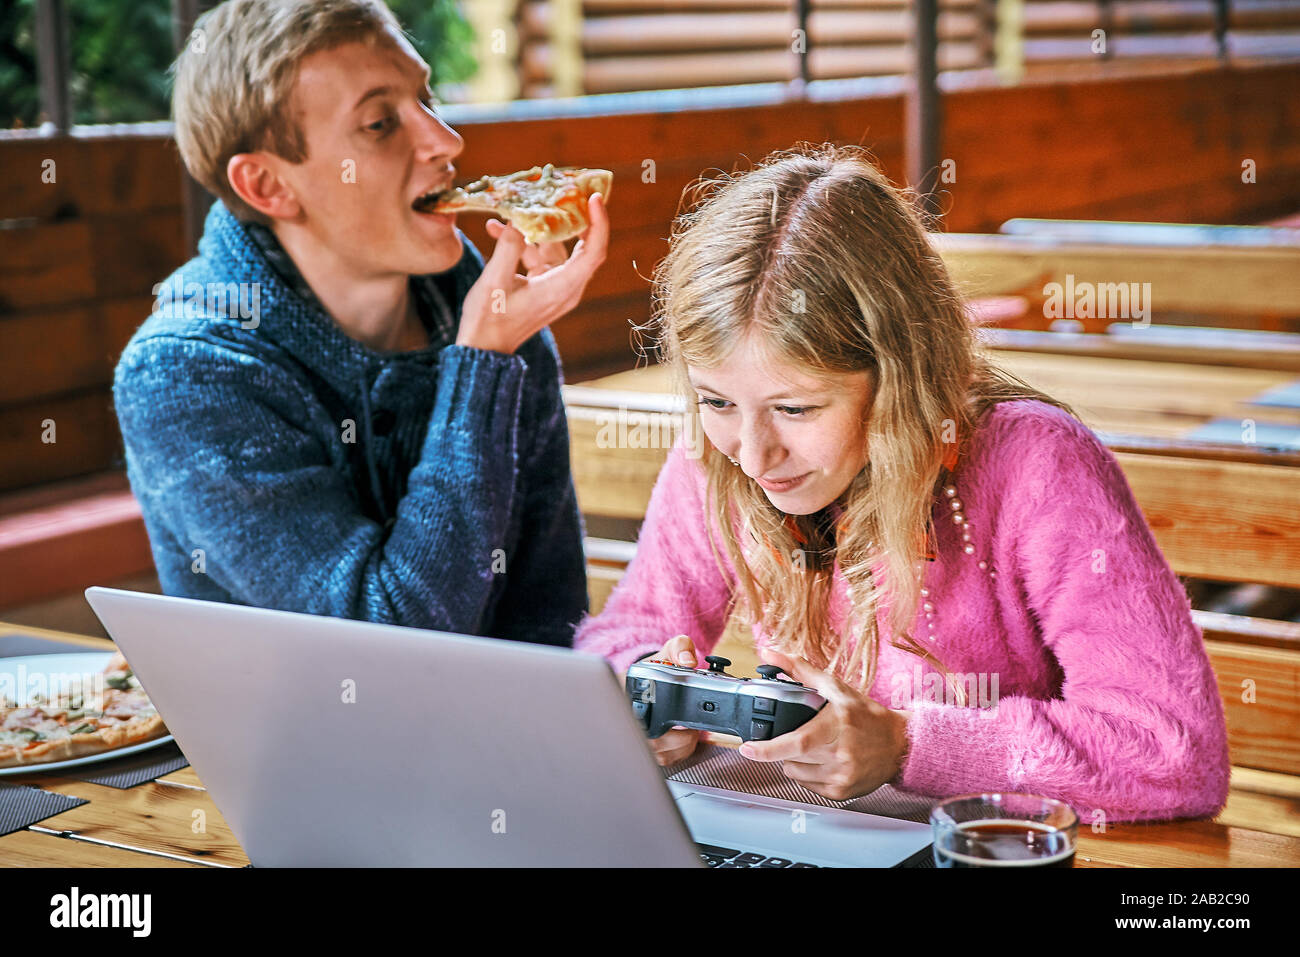 girl gamer in a cafe with a young guy. man eating pizza Stock Photo